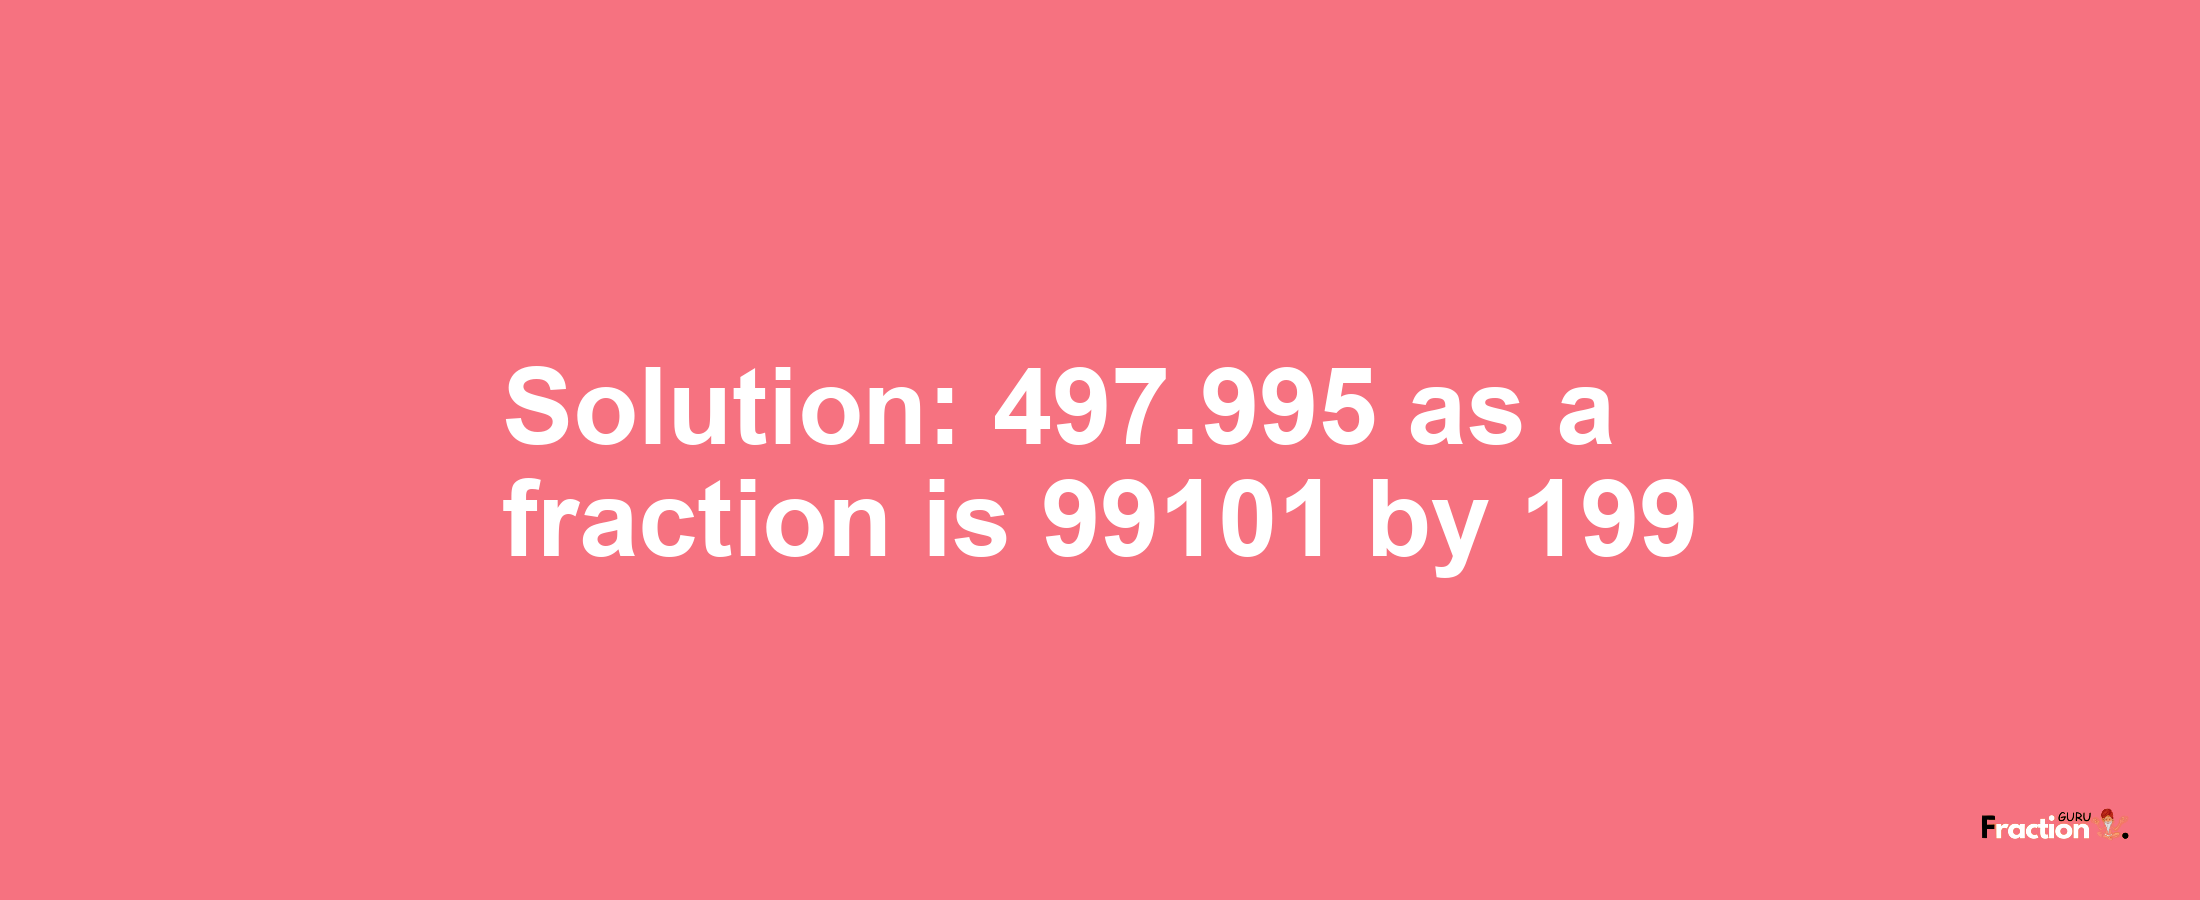 Solution:497.995 as a fraction is 99101/199